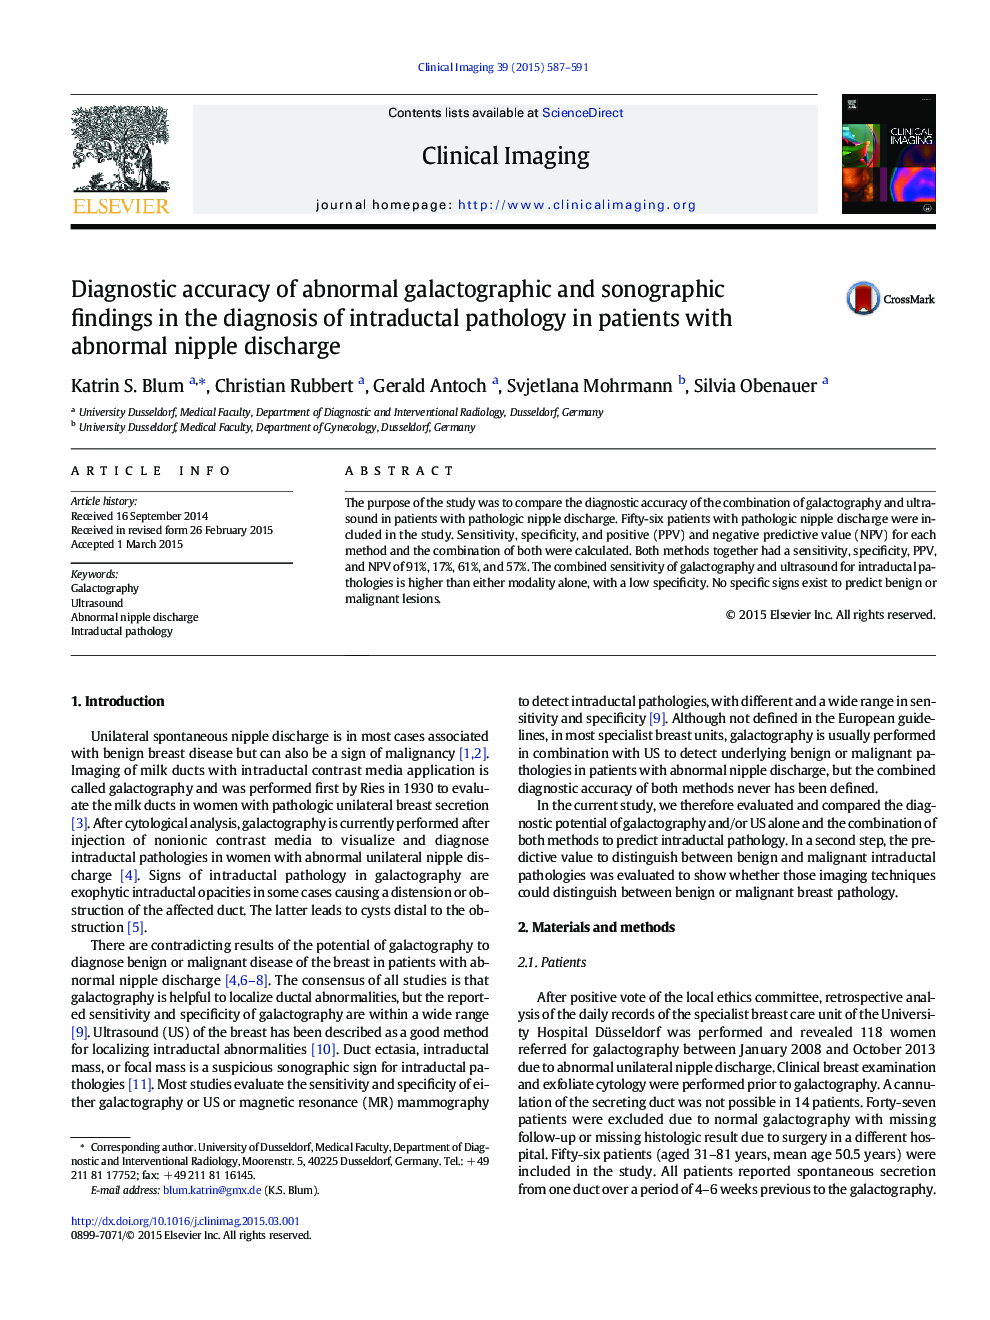 Diagnostic accuracy of abnormal galactographic and sonographic findings in the diagnosis of intraductal pathology in patients with abnormal nipple discharge